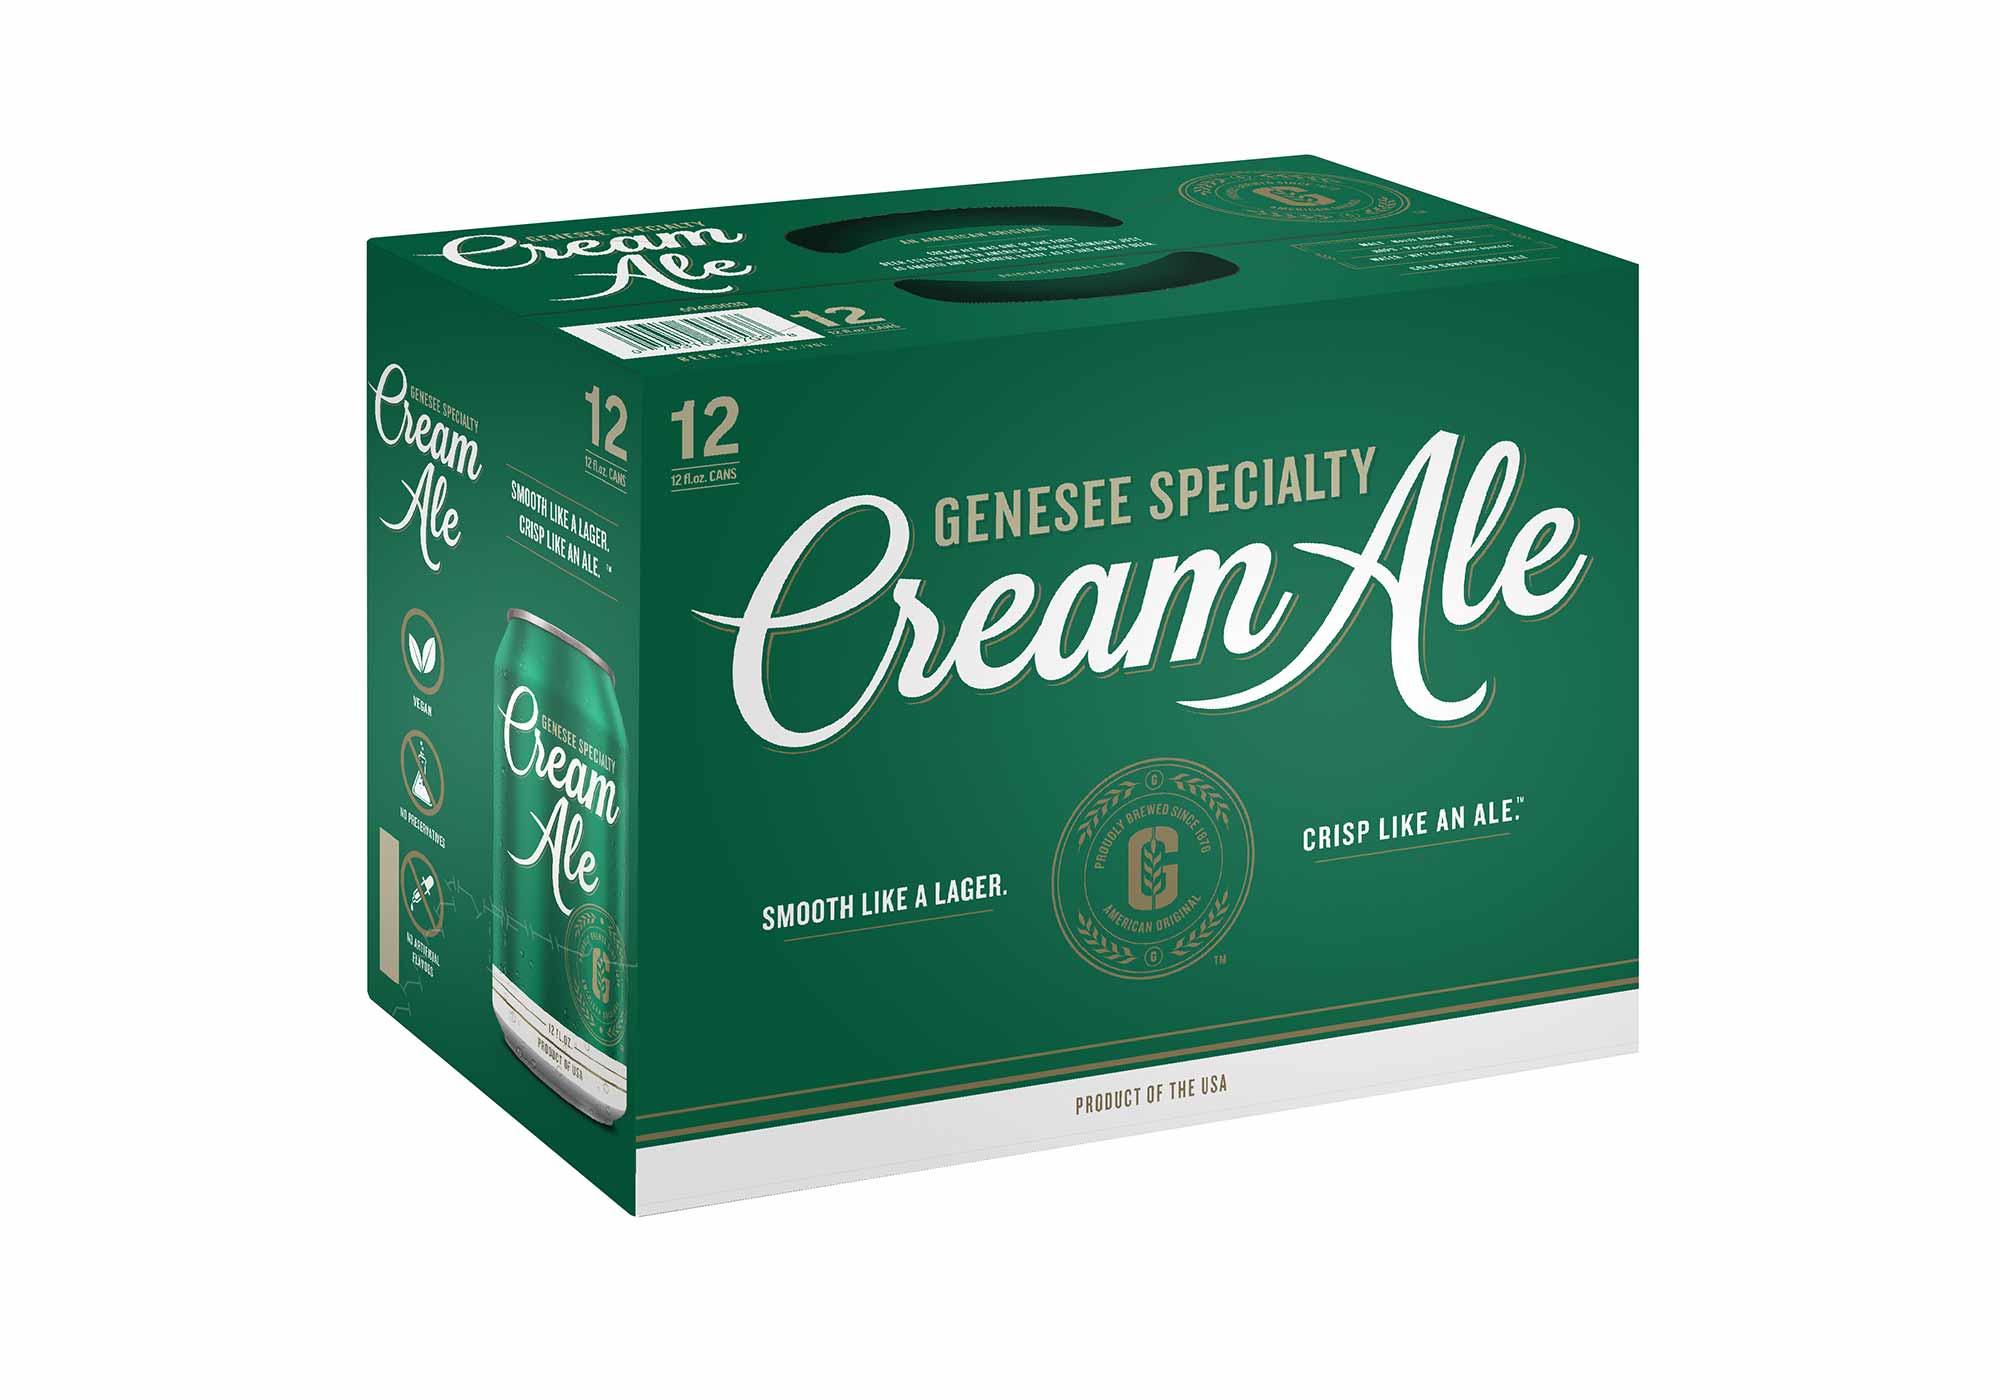 What Exactly is a Cream Ale?